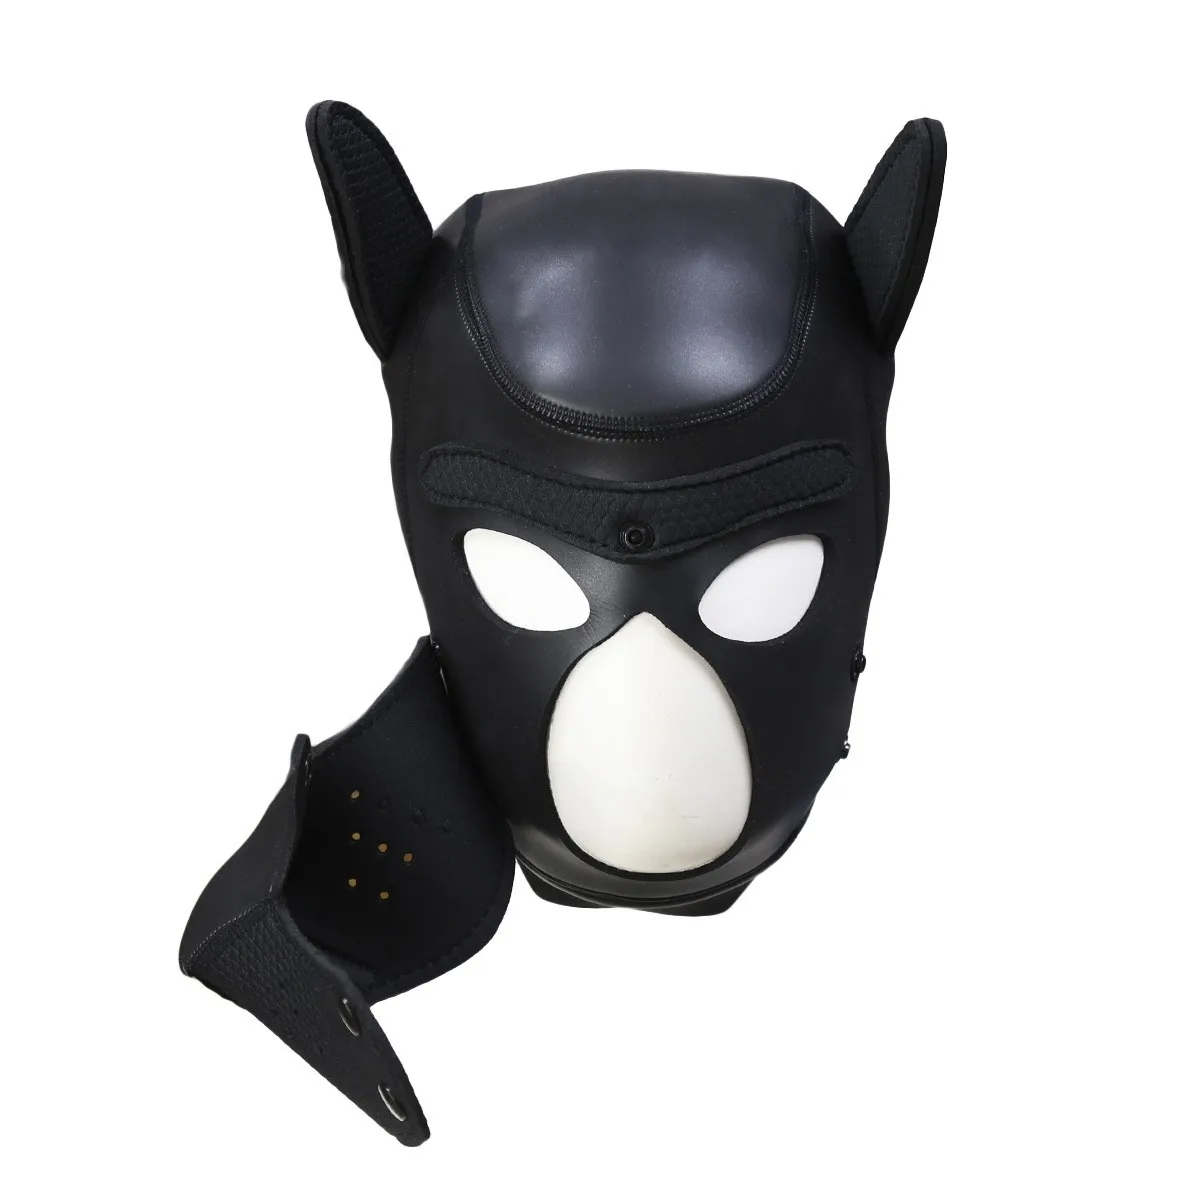 L size brand new fashion padded latex rubber role play dog mask puppy cosplay full head thumb200